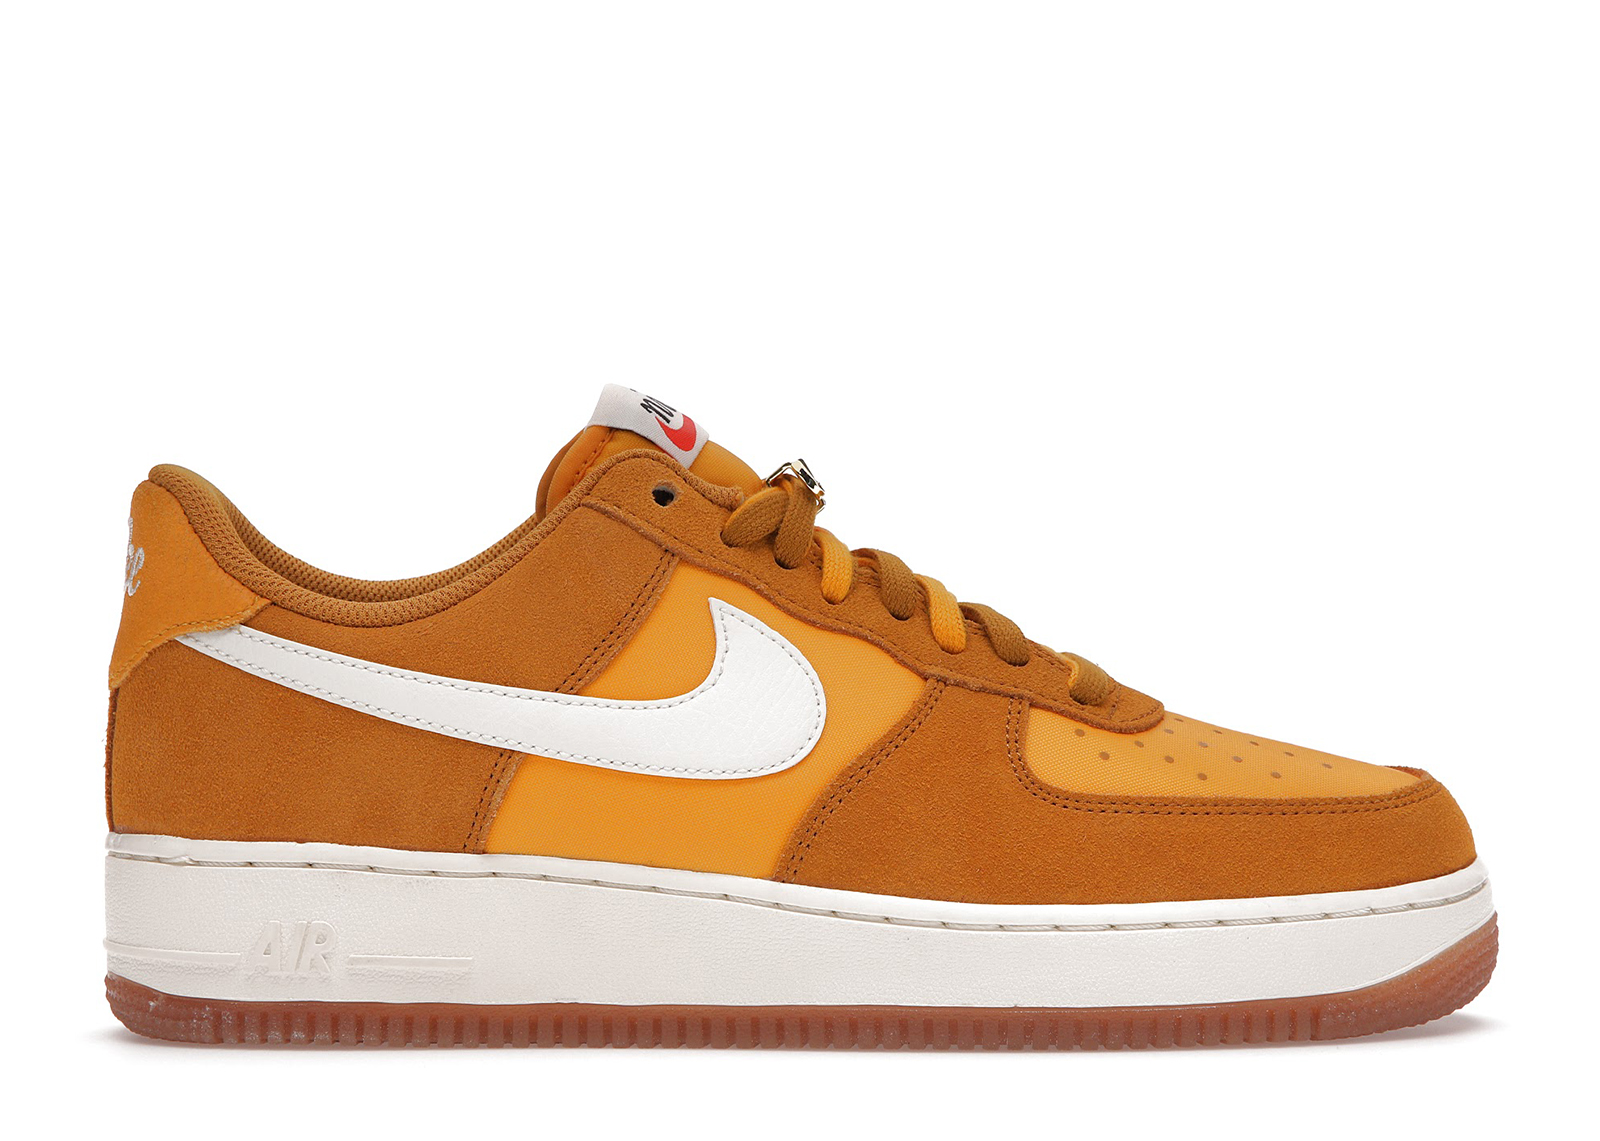 Nike Air Force 1 Low '07 First Use University Gold (Women's